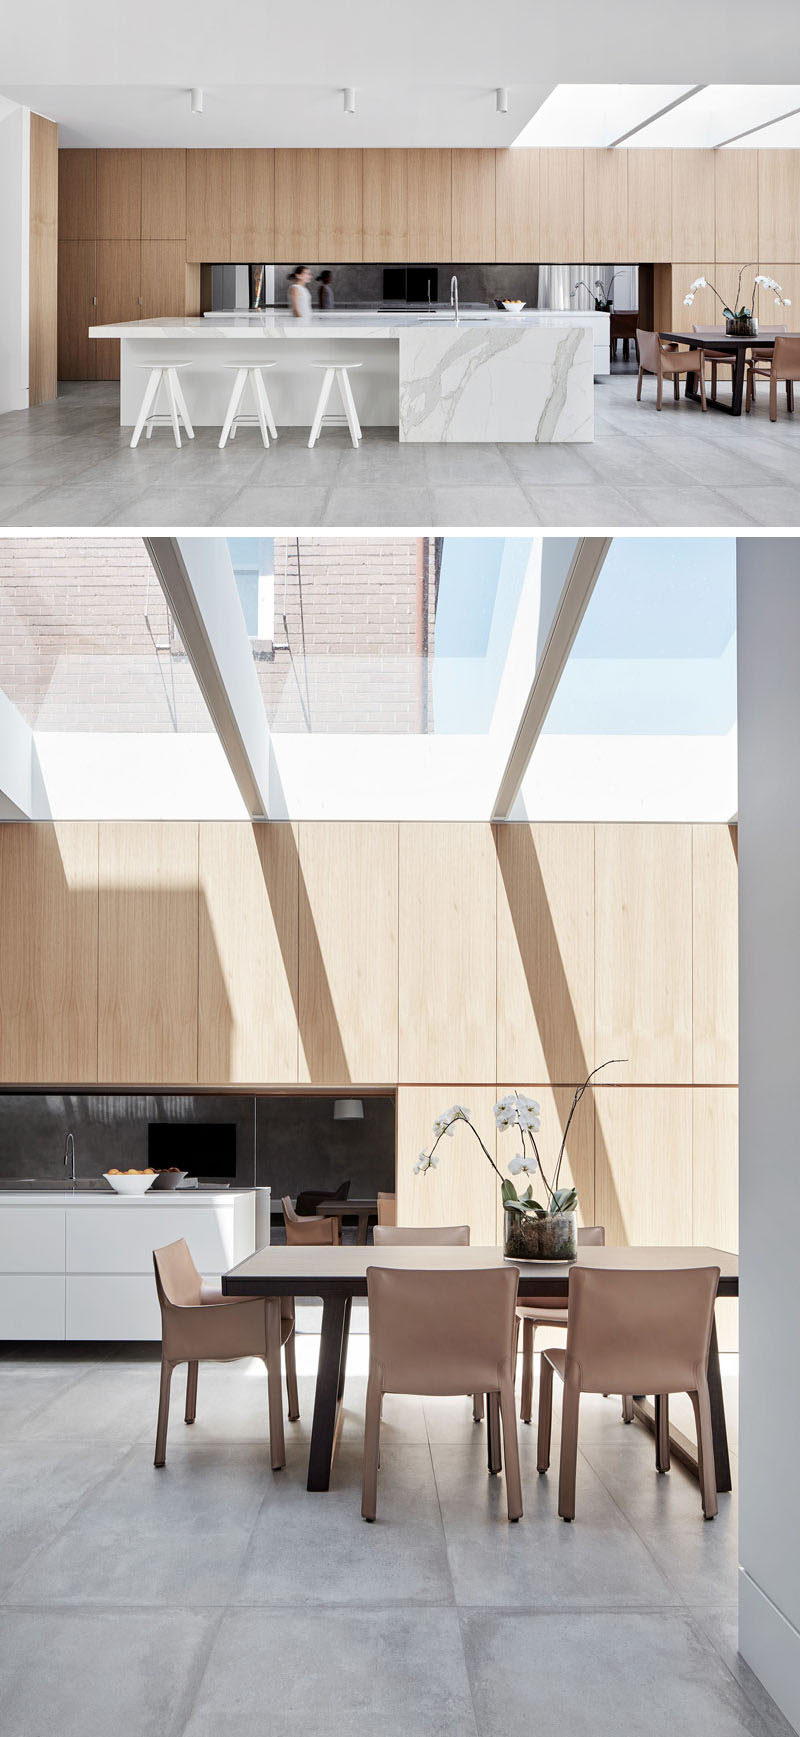 This modern kitchen has a nice light feel to it with the use of light wood and light marble. The dining room shares the space and has plenty of natural light from the large skylight above.